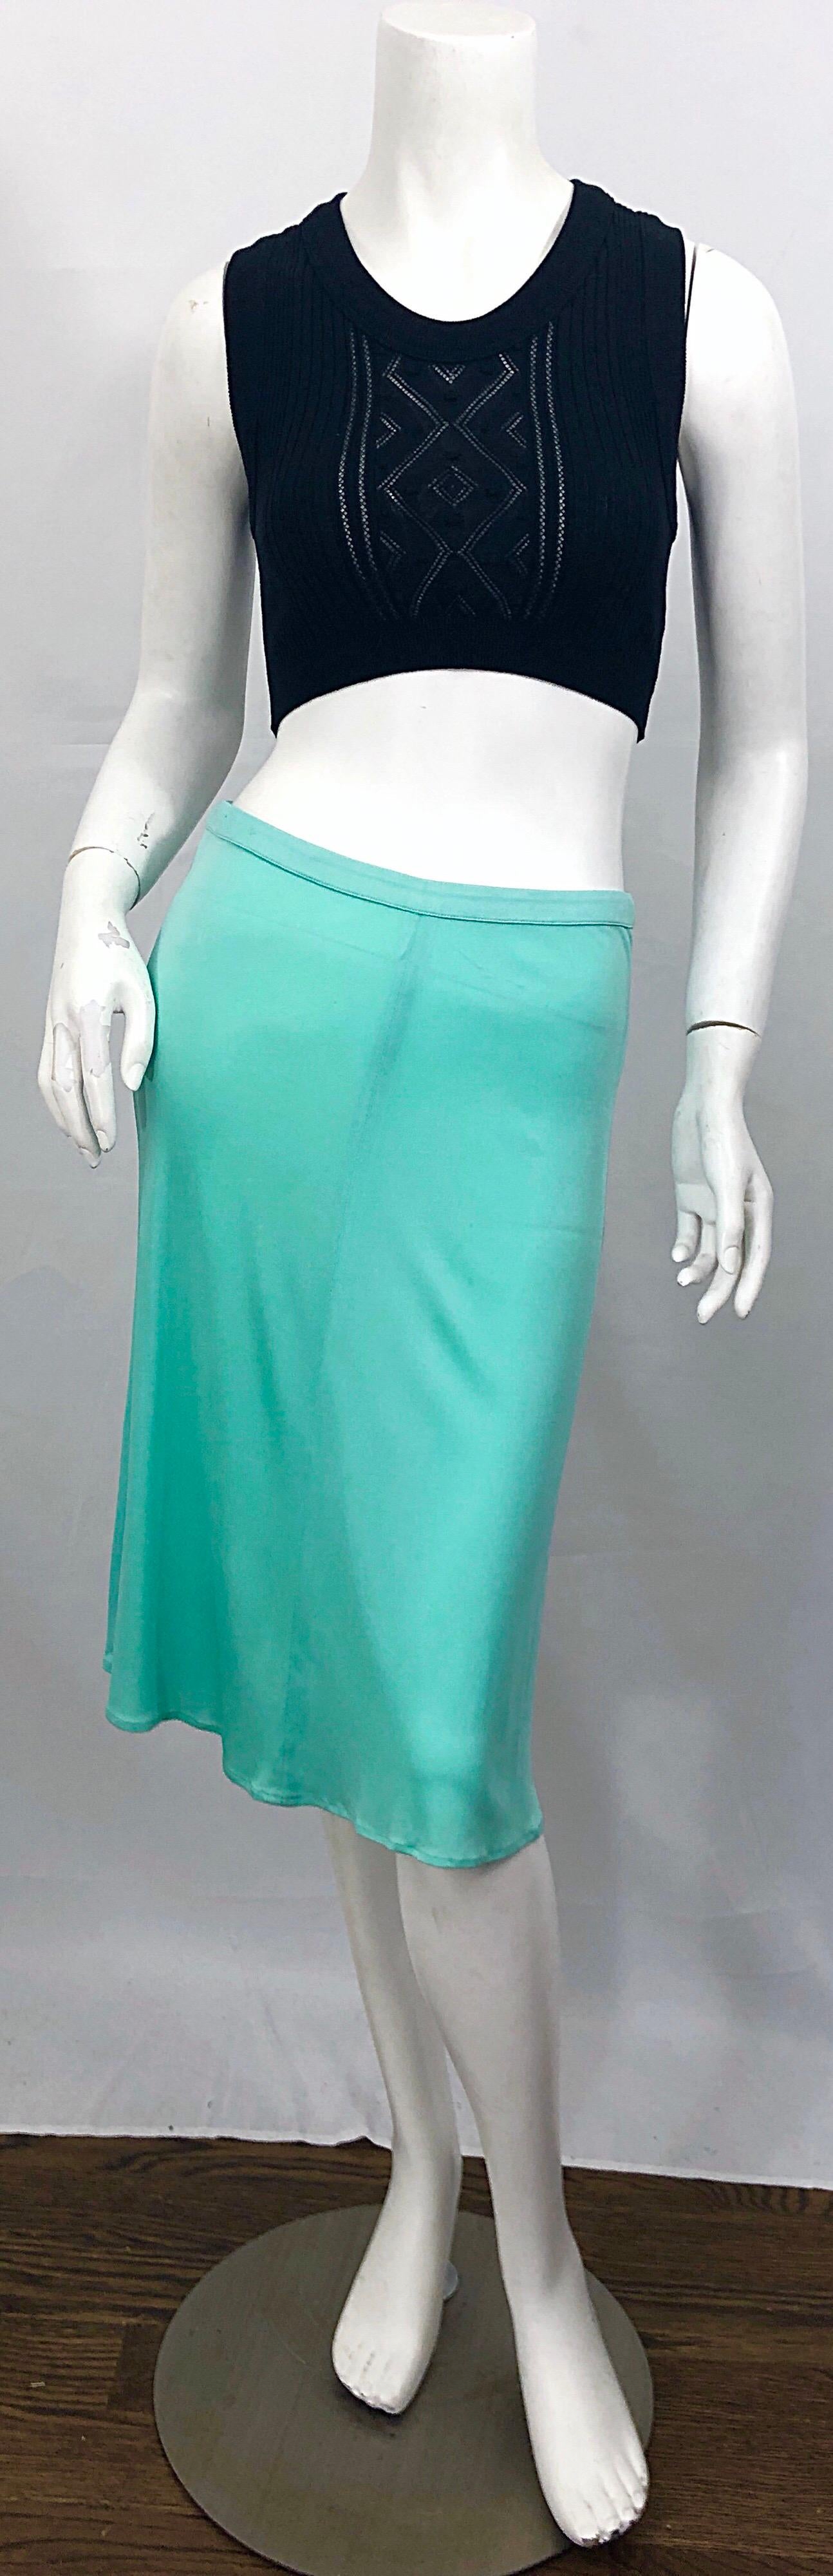 1990s Gianni Versace Couture Teal Turquoise Blue Silk Jersey Vintage 90s Skirt For Sale 6